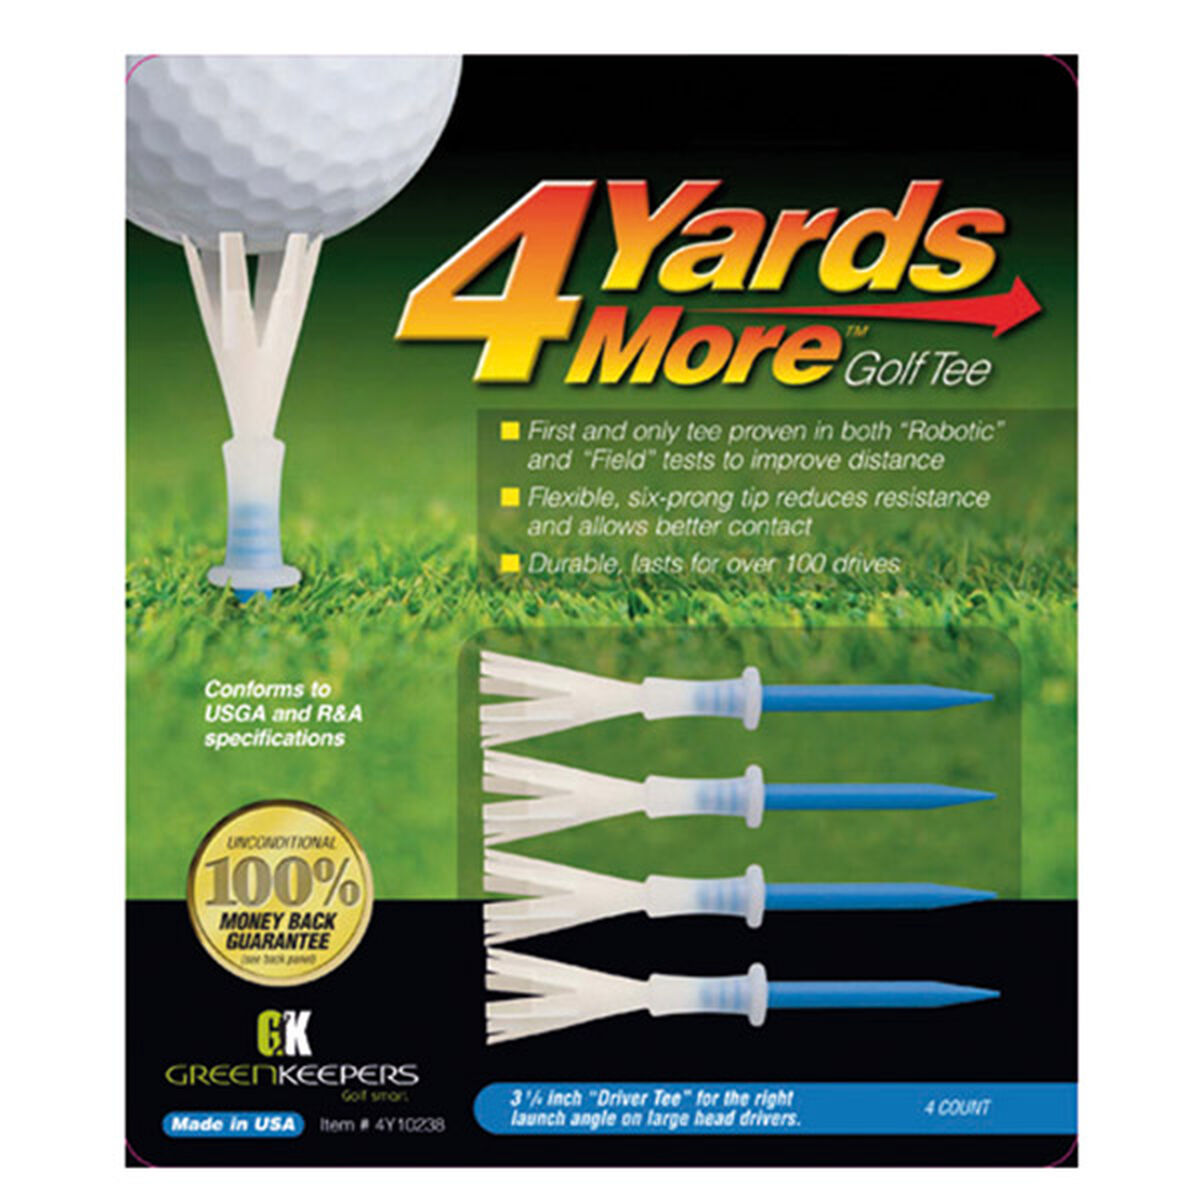 4 Yards More Blue Pack of 4 Golf Driver Golf Tees, Size: 3 1/4", 3 1/4 inches | American Golf von 4 Yards More